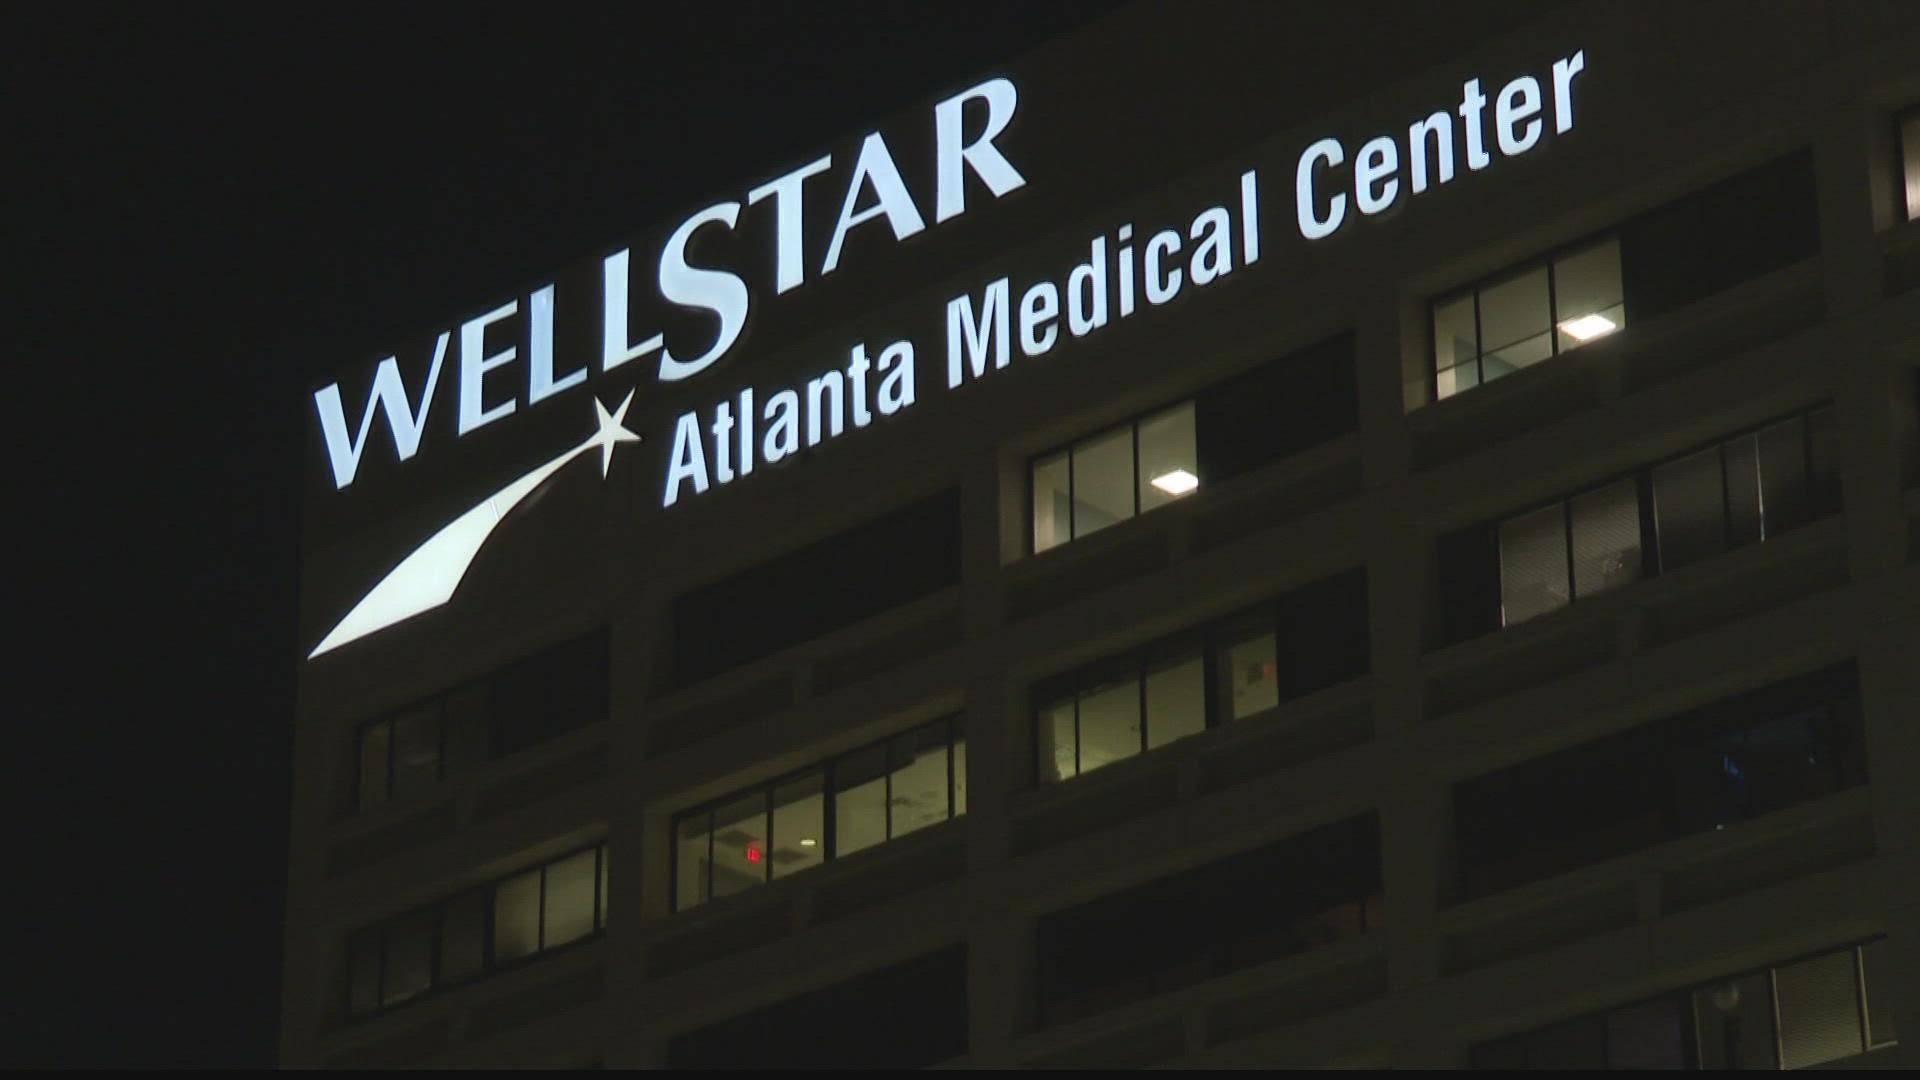 The hospital will begin diverting patients to other medical centers beginning on Oct. 3.